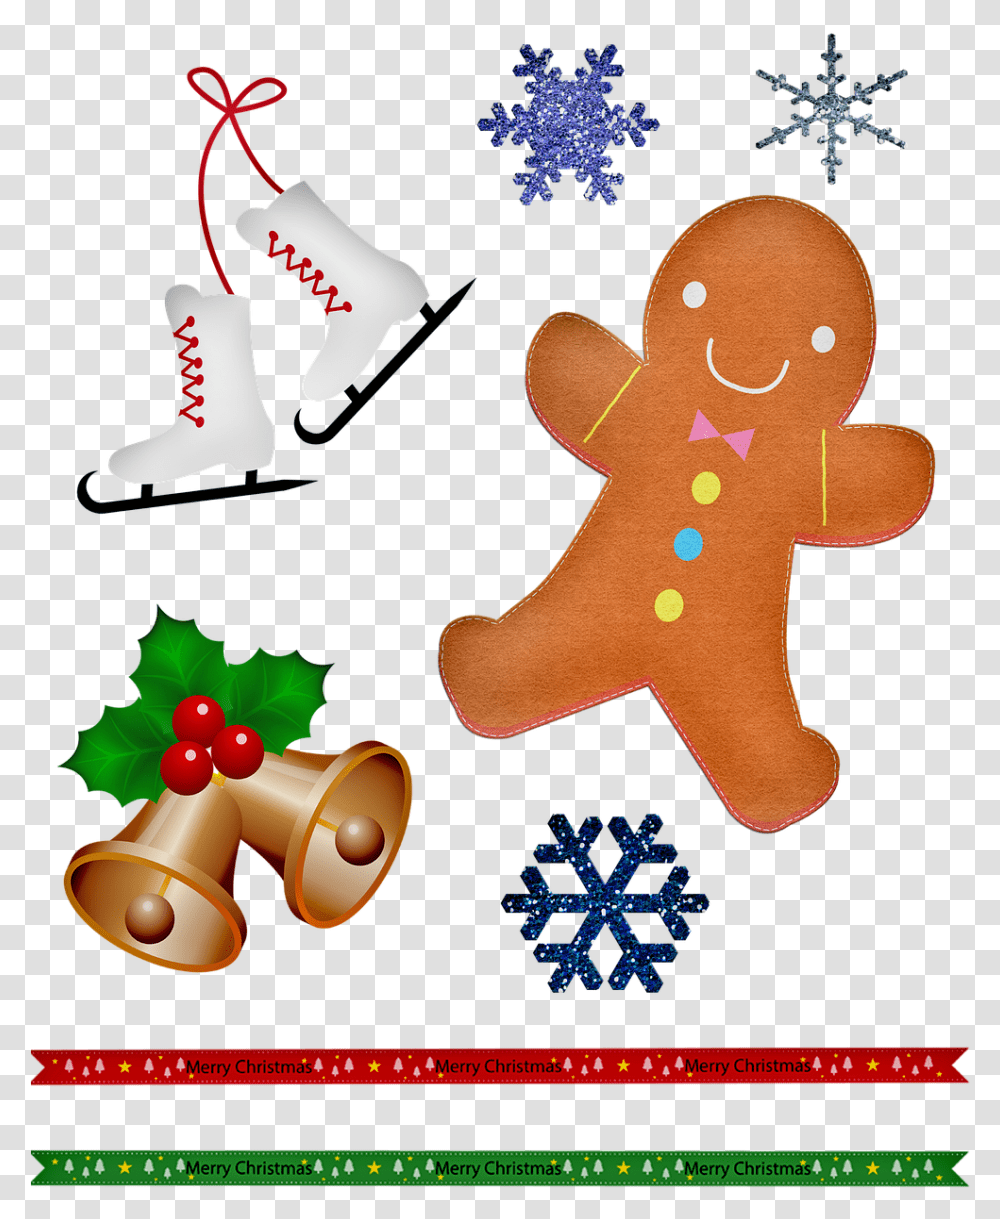 Gingerbread Man Bells Christmas Free Image On Pixabay Christmas Day, Cookie, Food, Biscuit, Sweets Transparent Png